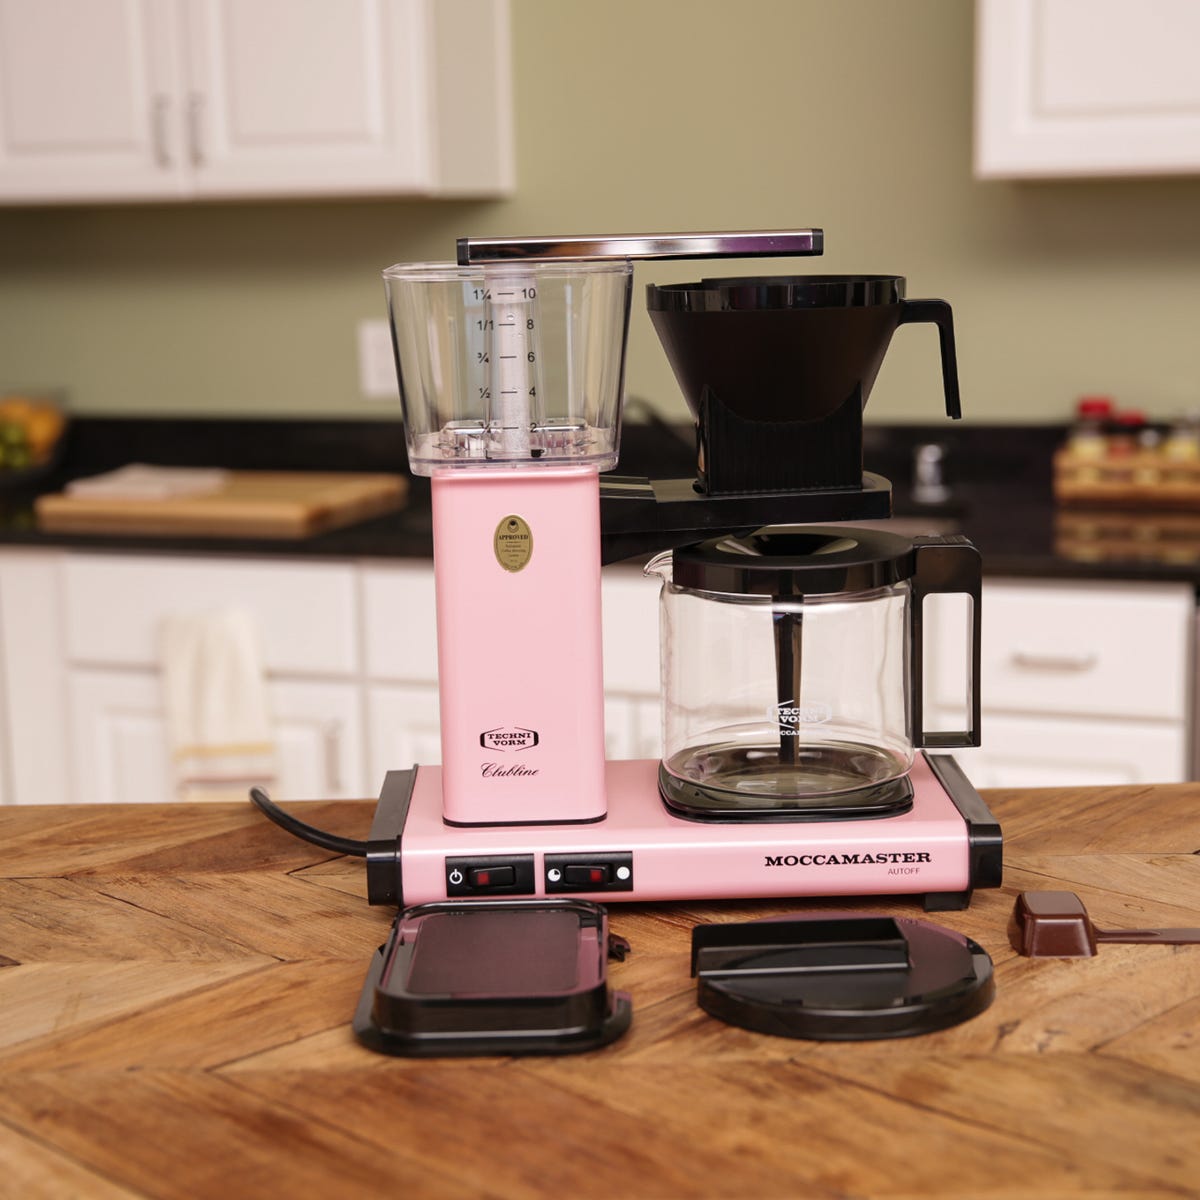 stribet At placere gnist Technivorm Moccamaster KBGC 741 AO review: Premium, colorful coffee machine  doesn't fulfill its potential - CNET